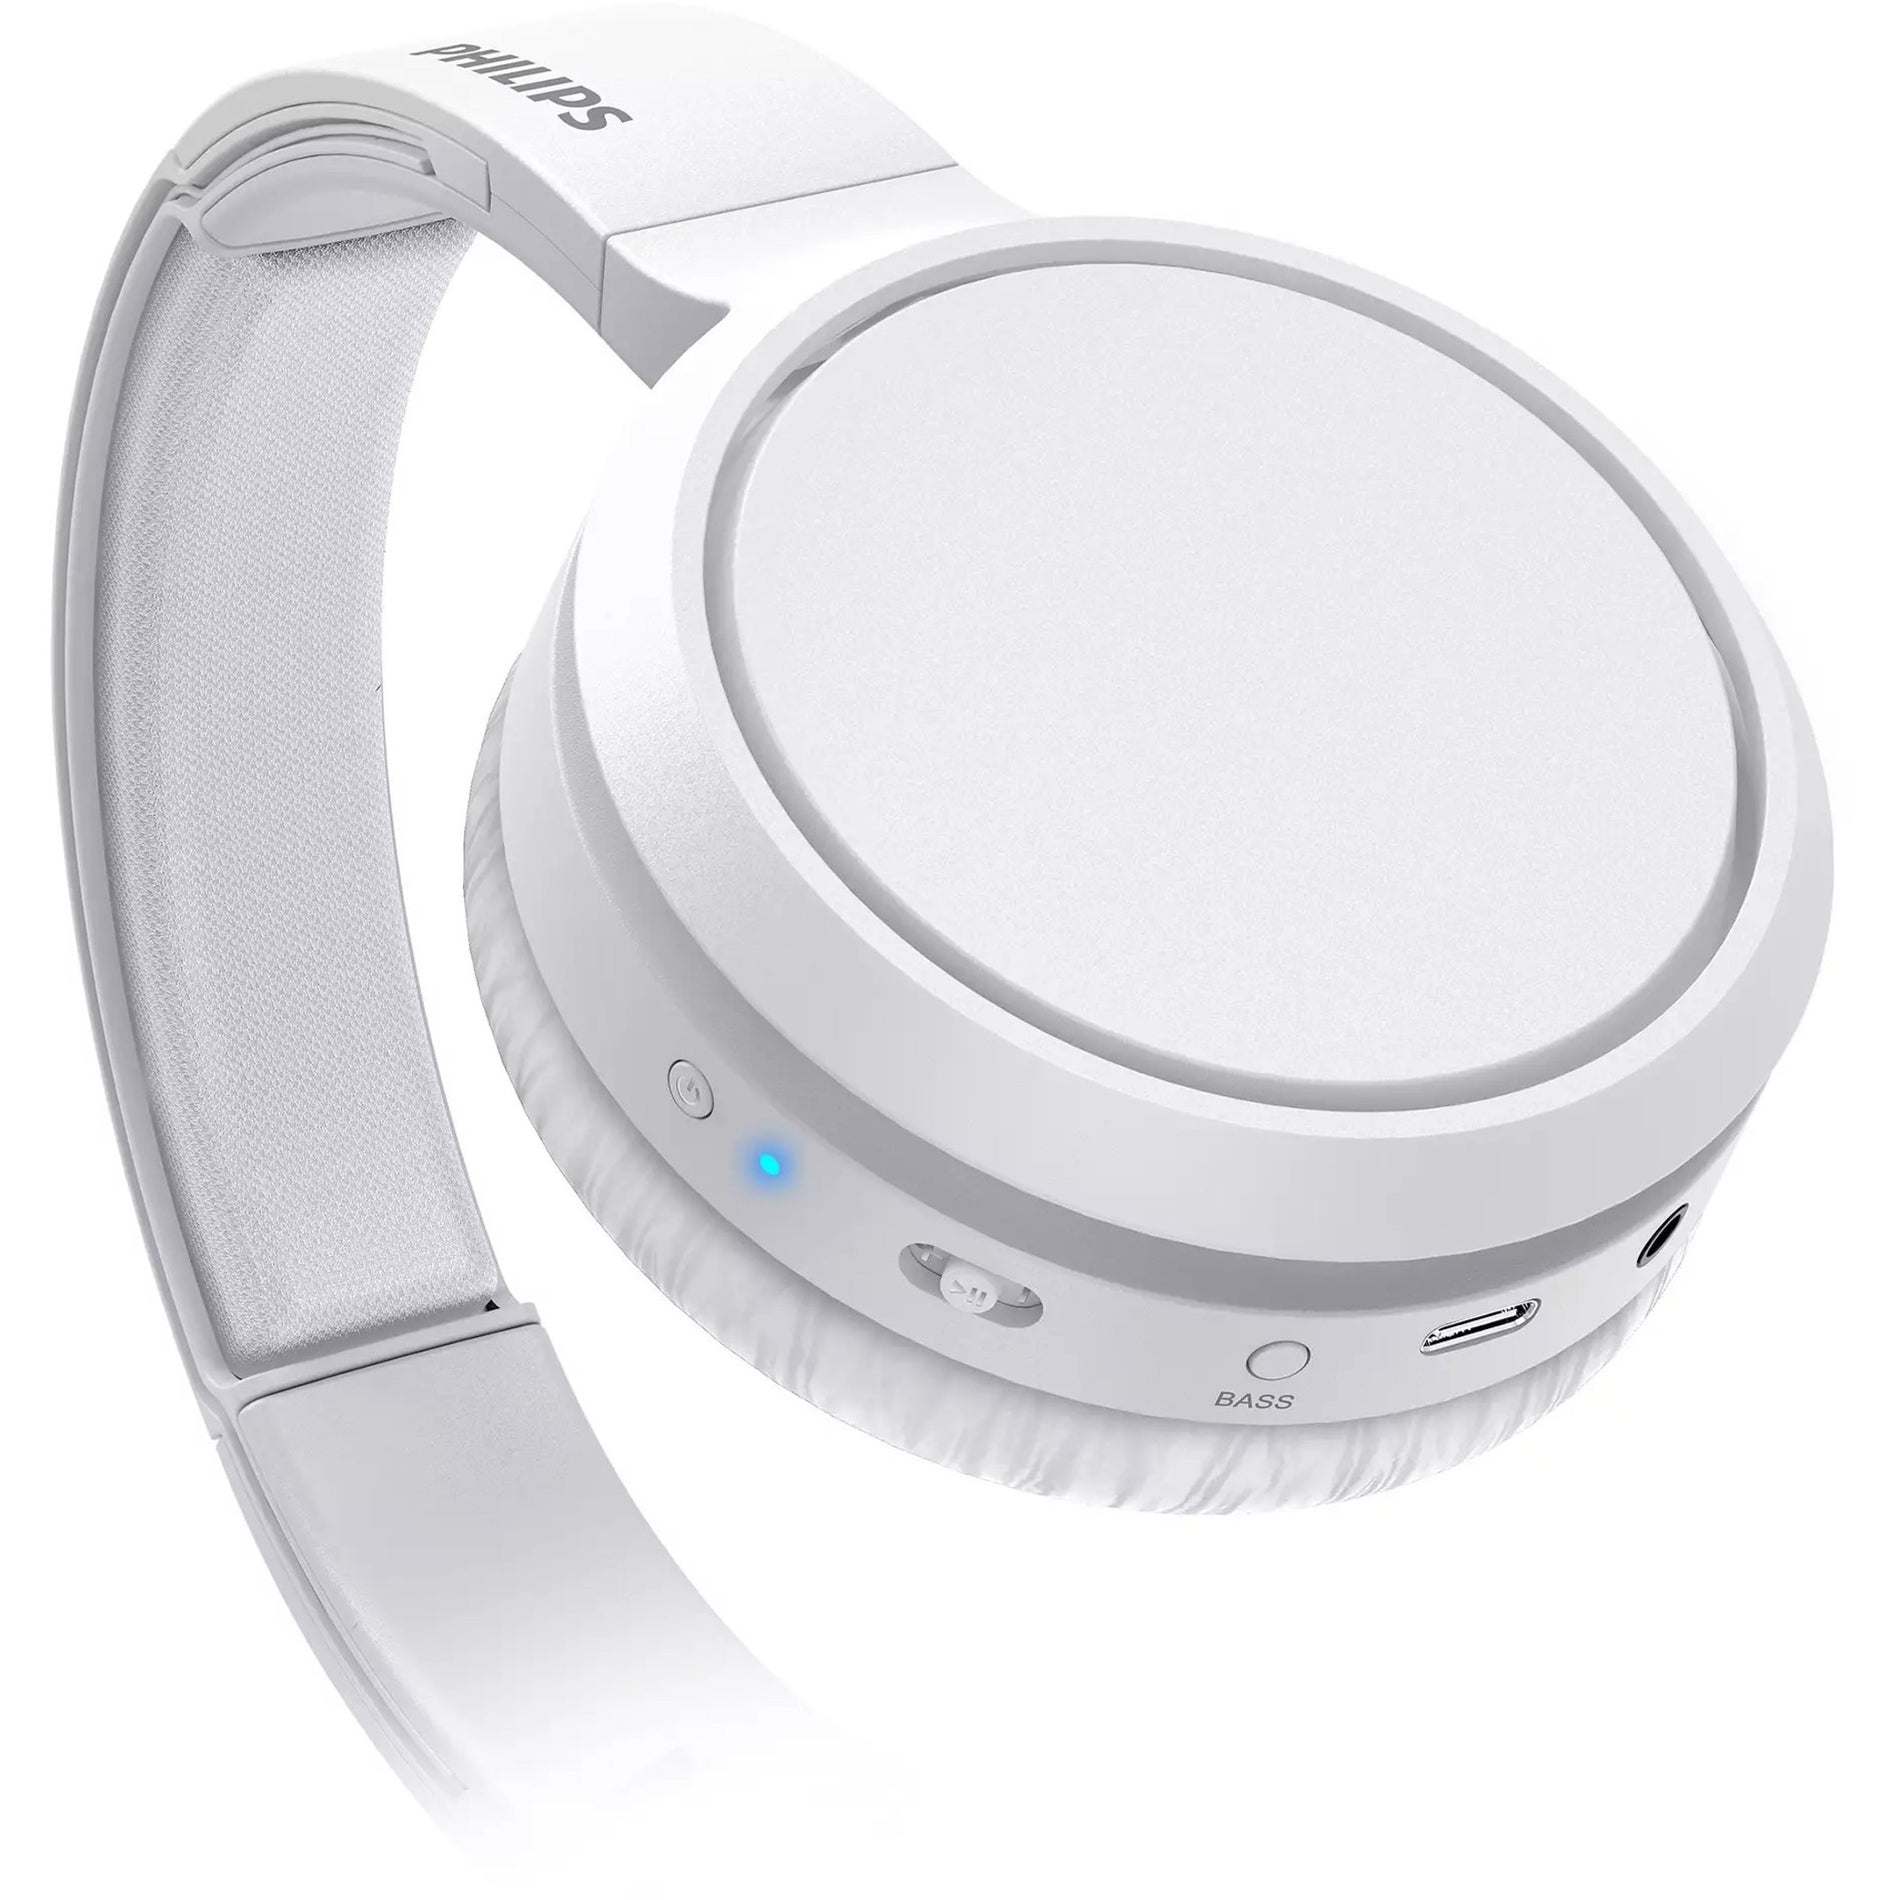 Philips TAH5205WT/00 Headset, Fold-Flat Lightweight Over-the-Ear Headphones with Integrated Microphone, White